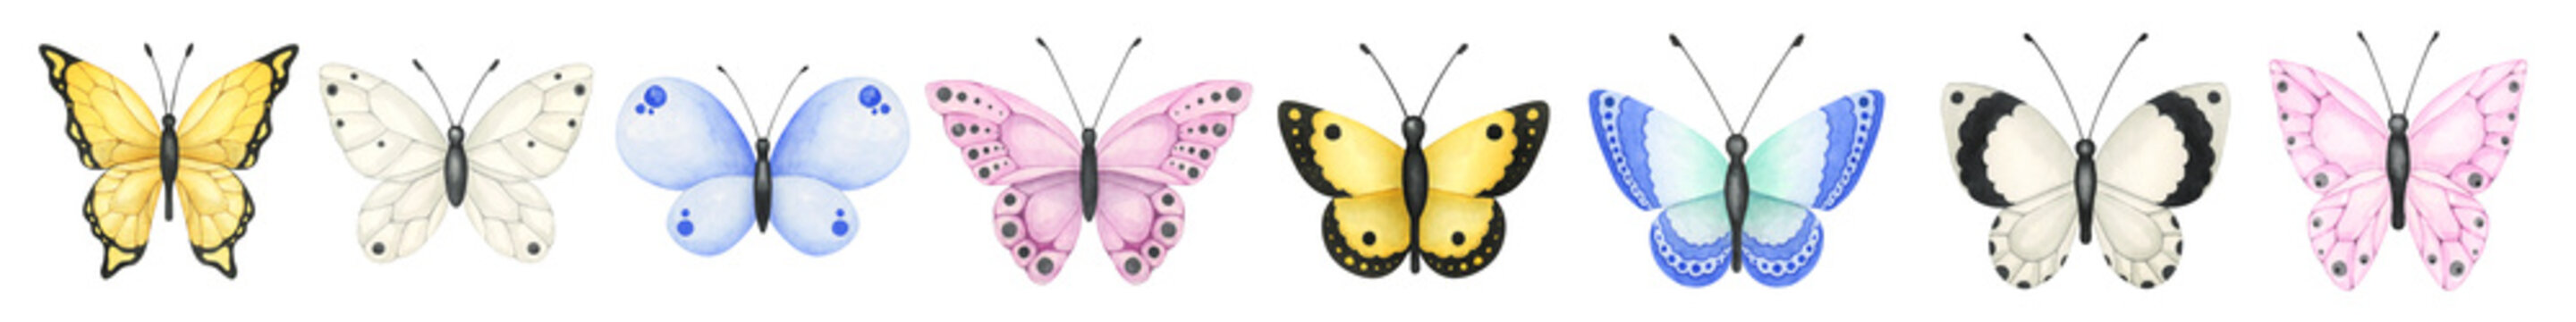 Collection of beautiful watercolor butterflies. Delicate insect illustrations isolated illustration on white background